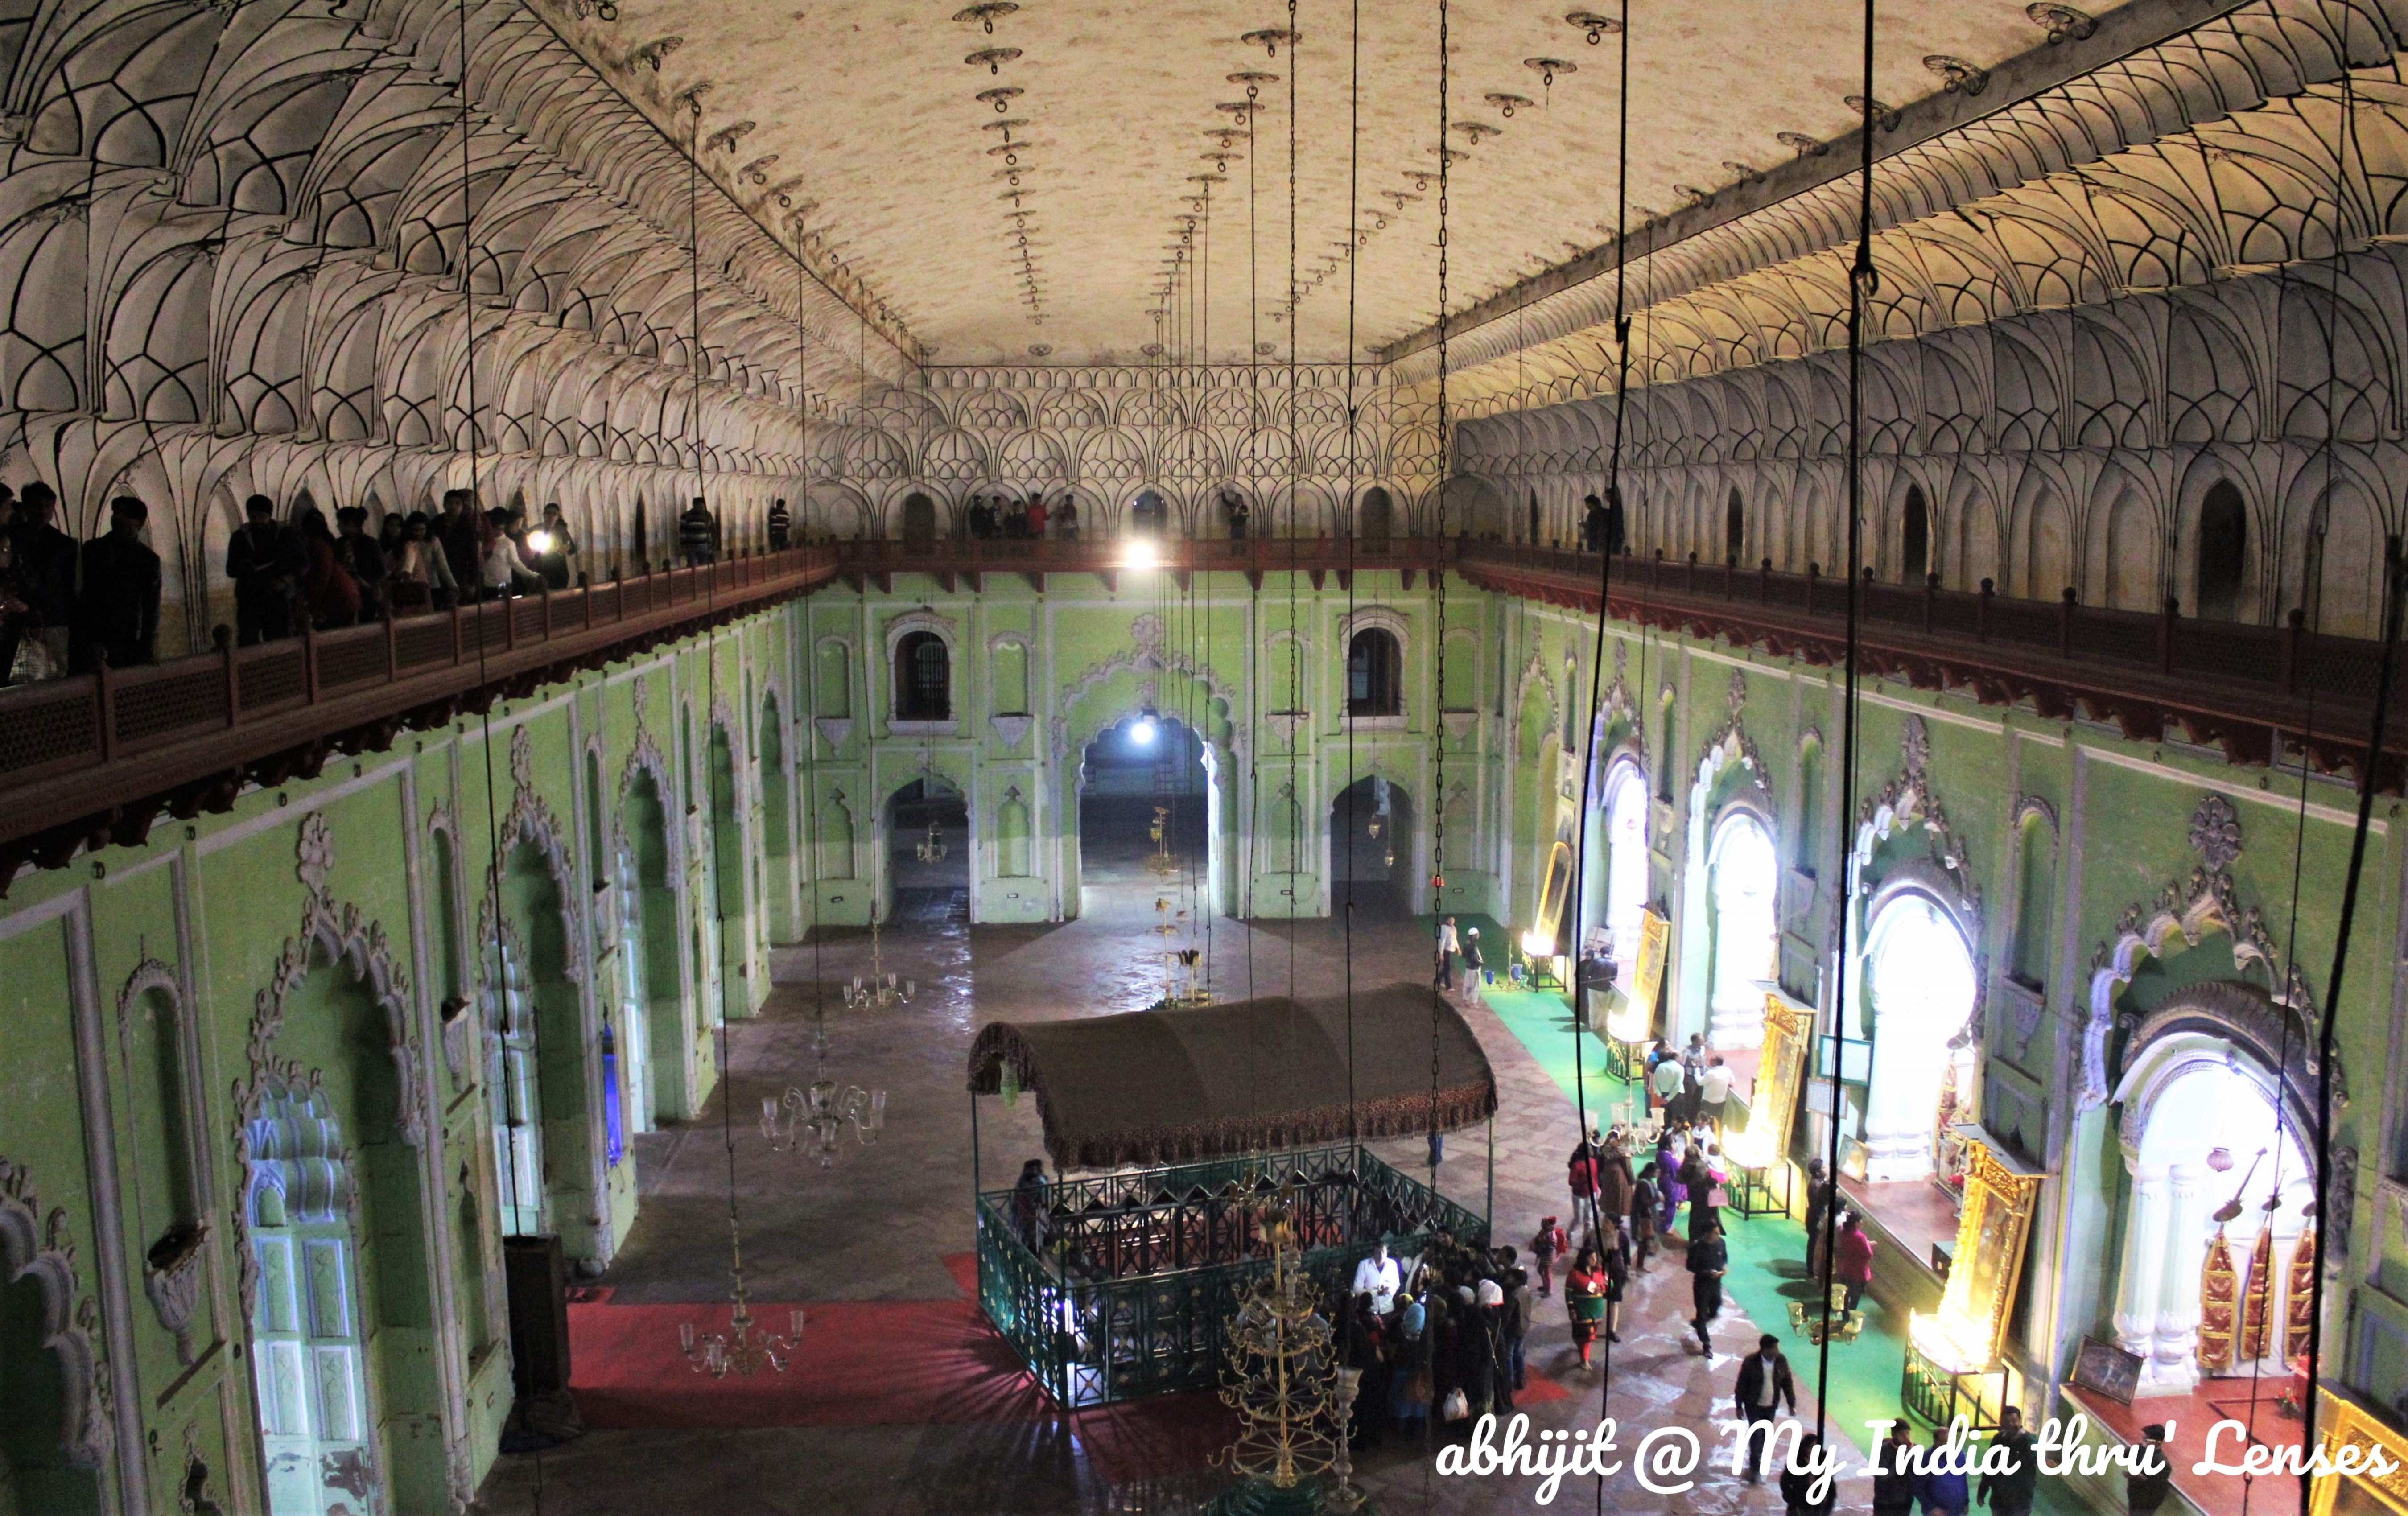 The Central Hall inside  Main Building with the tomb of Asaf-ud-daulah